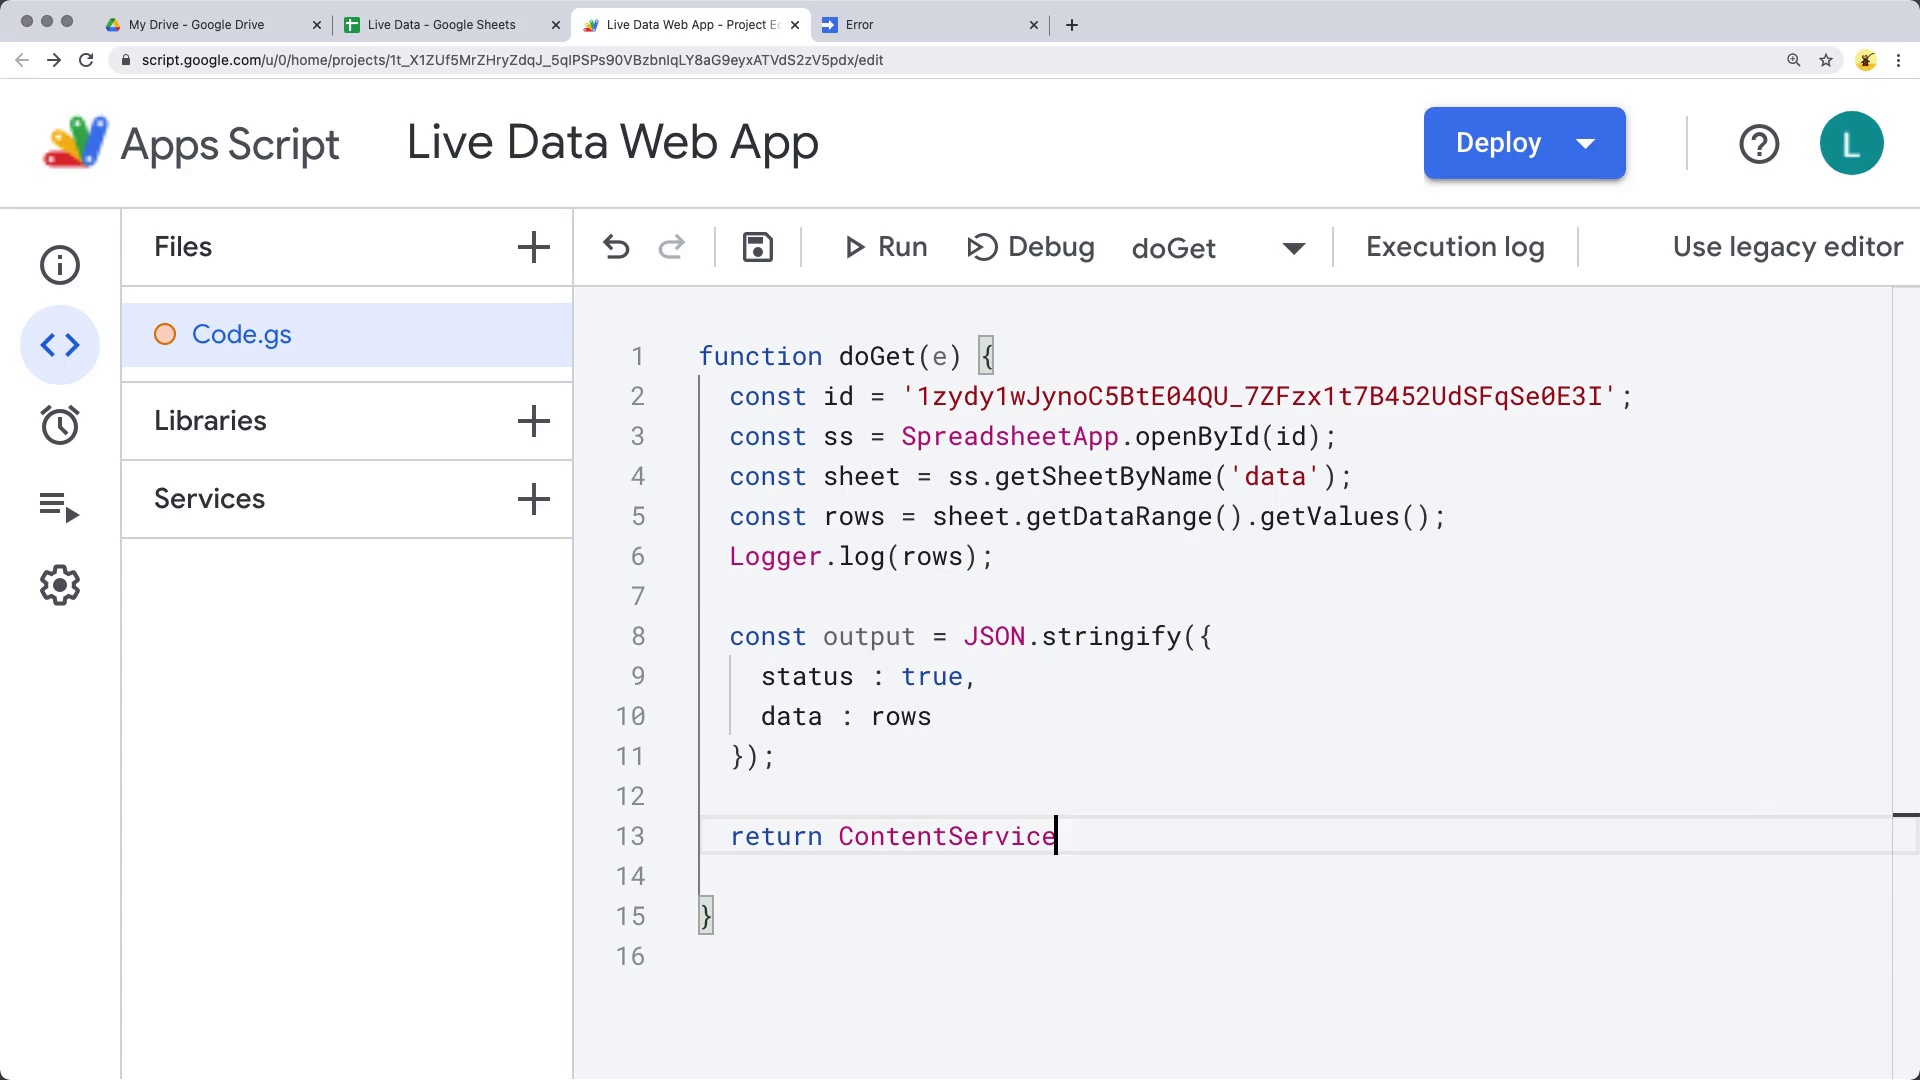 Learn to use Data in a Google Sheet to output as JSON with AJAX